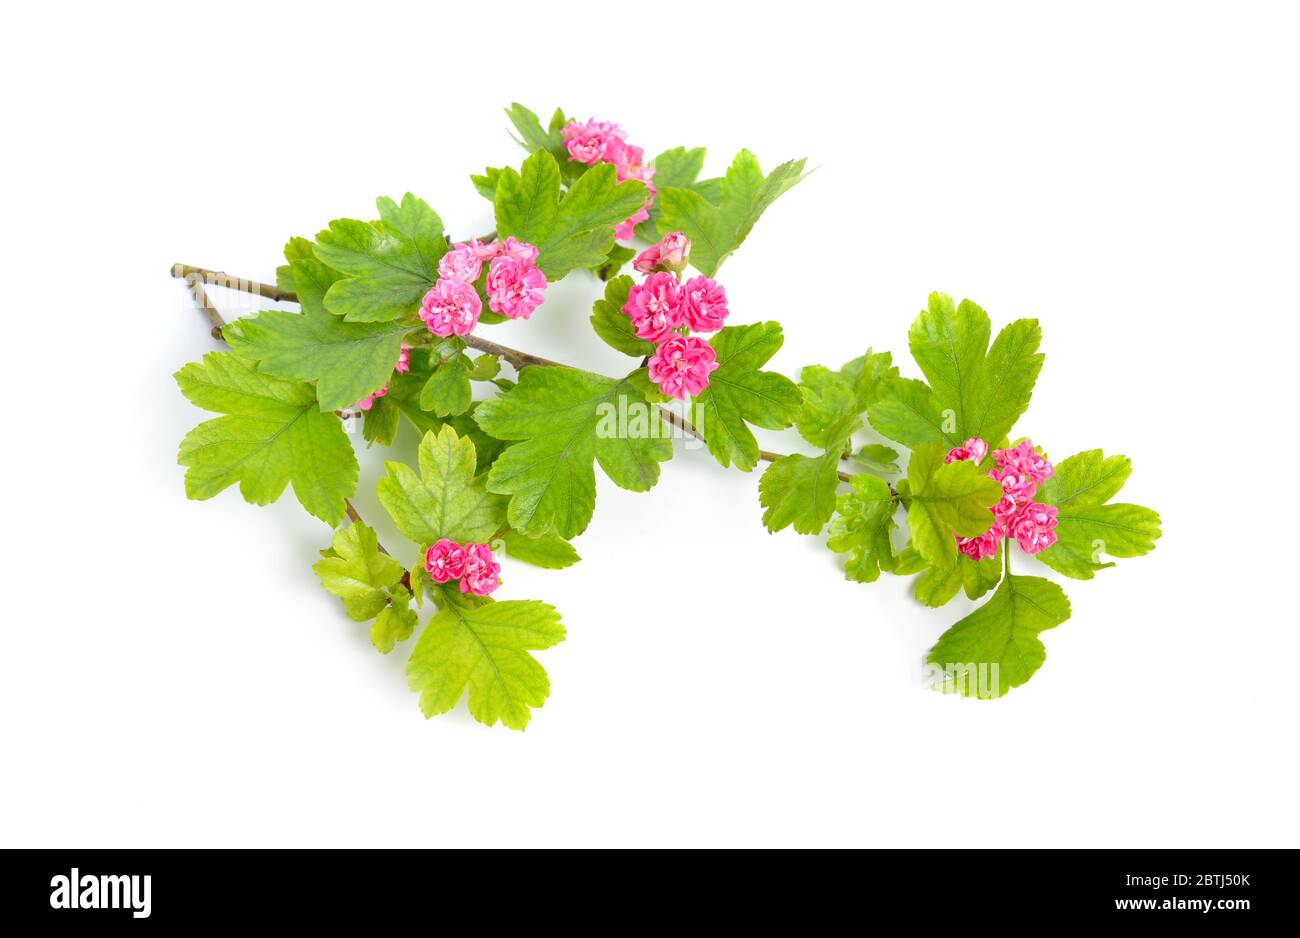 Red Flowers Crataegus hawthorn quickthorn thornapple May-tree, whitethorn or hawberry. Isolated Stock Photo